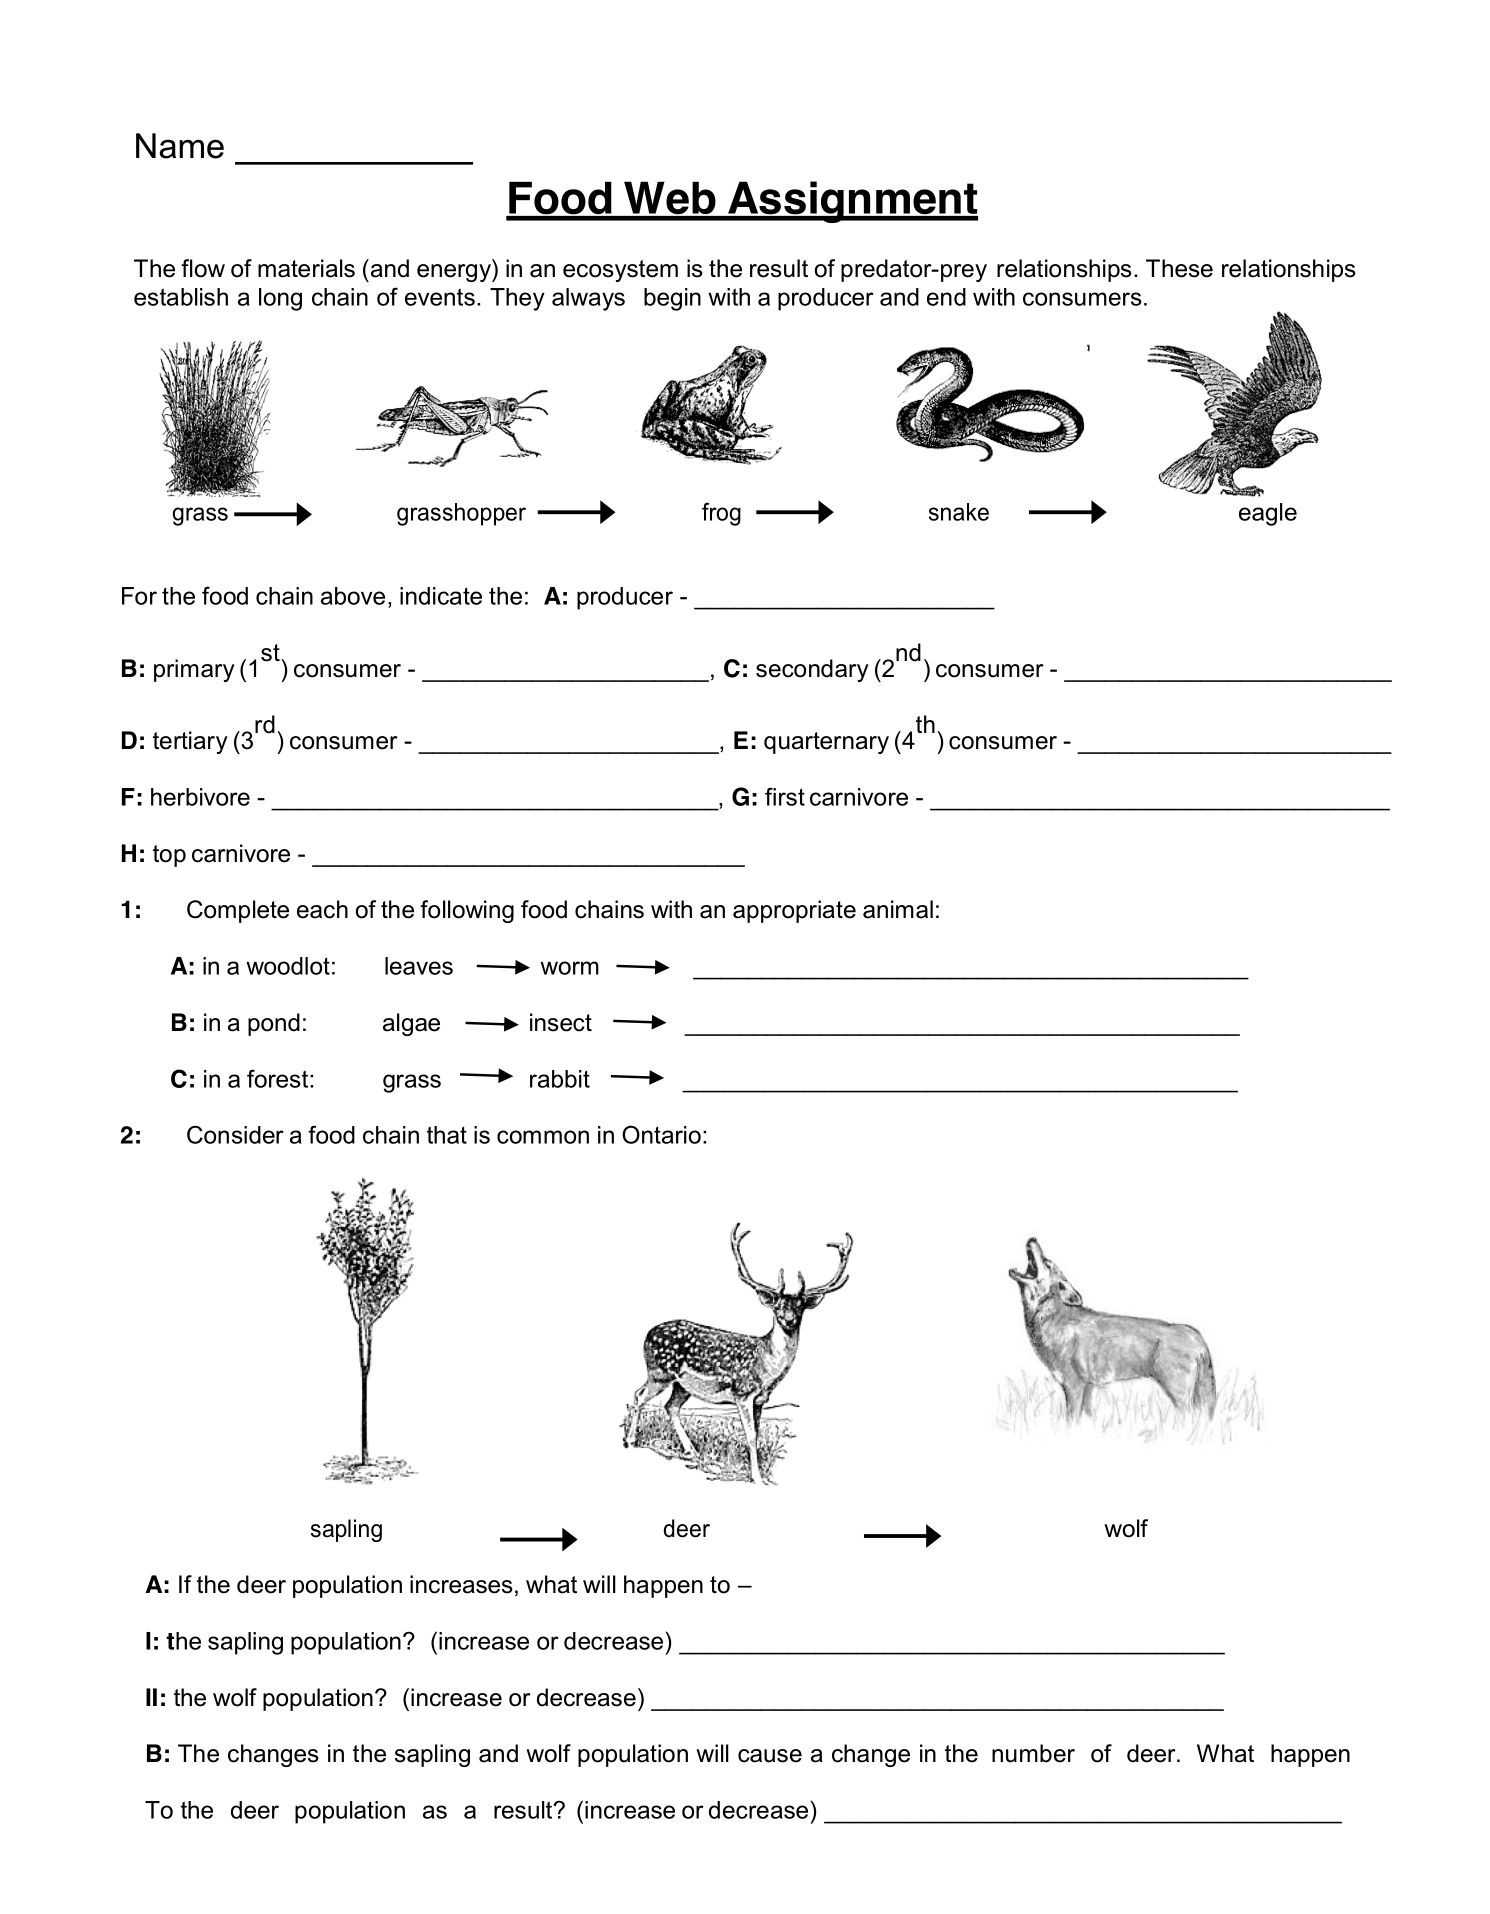 Food Web Worksheet Answers with Food Sustainability Worksheet Refrence Food Web assignment Worksheet